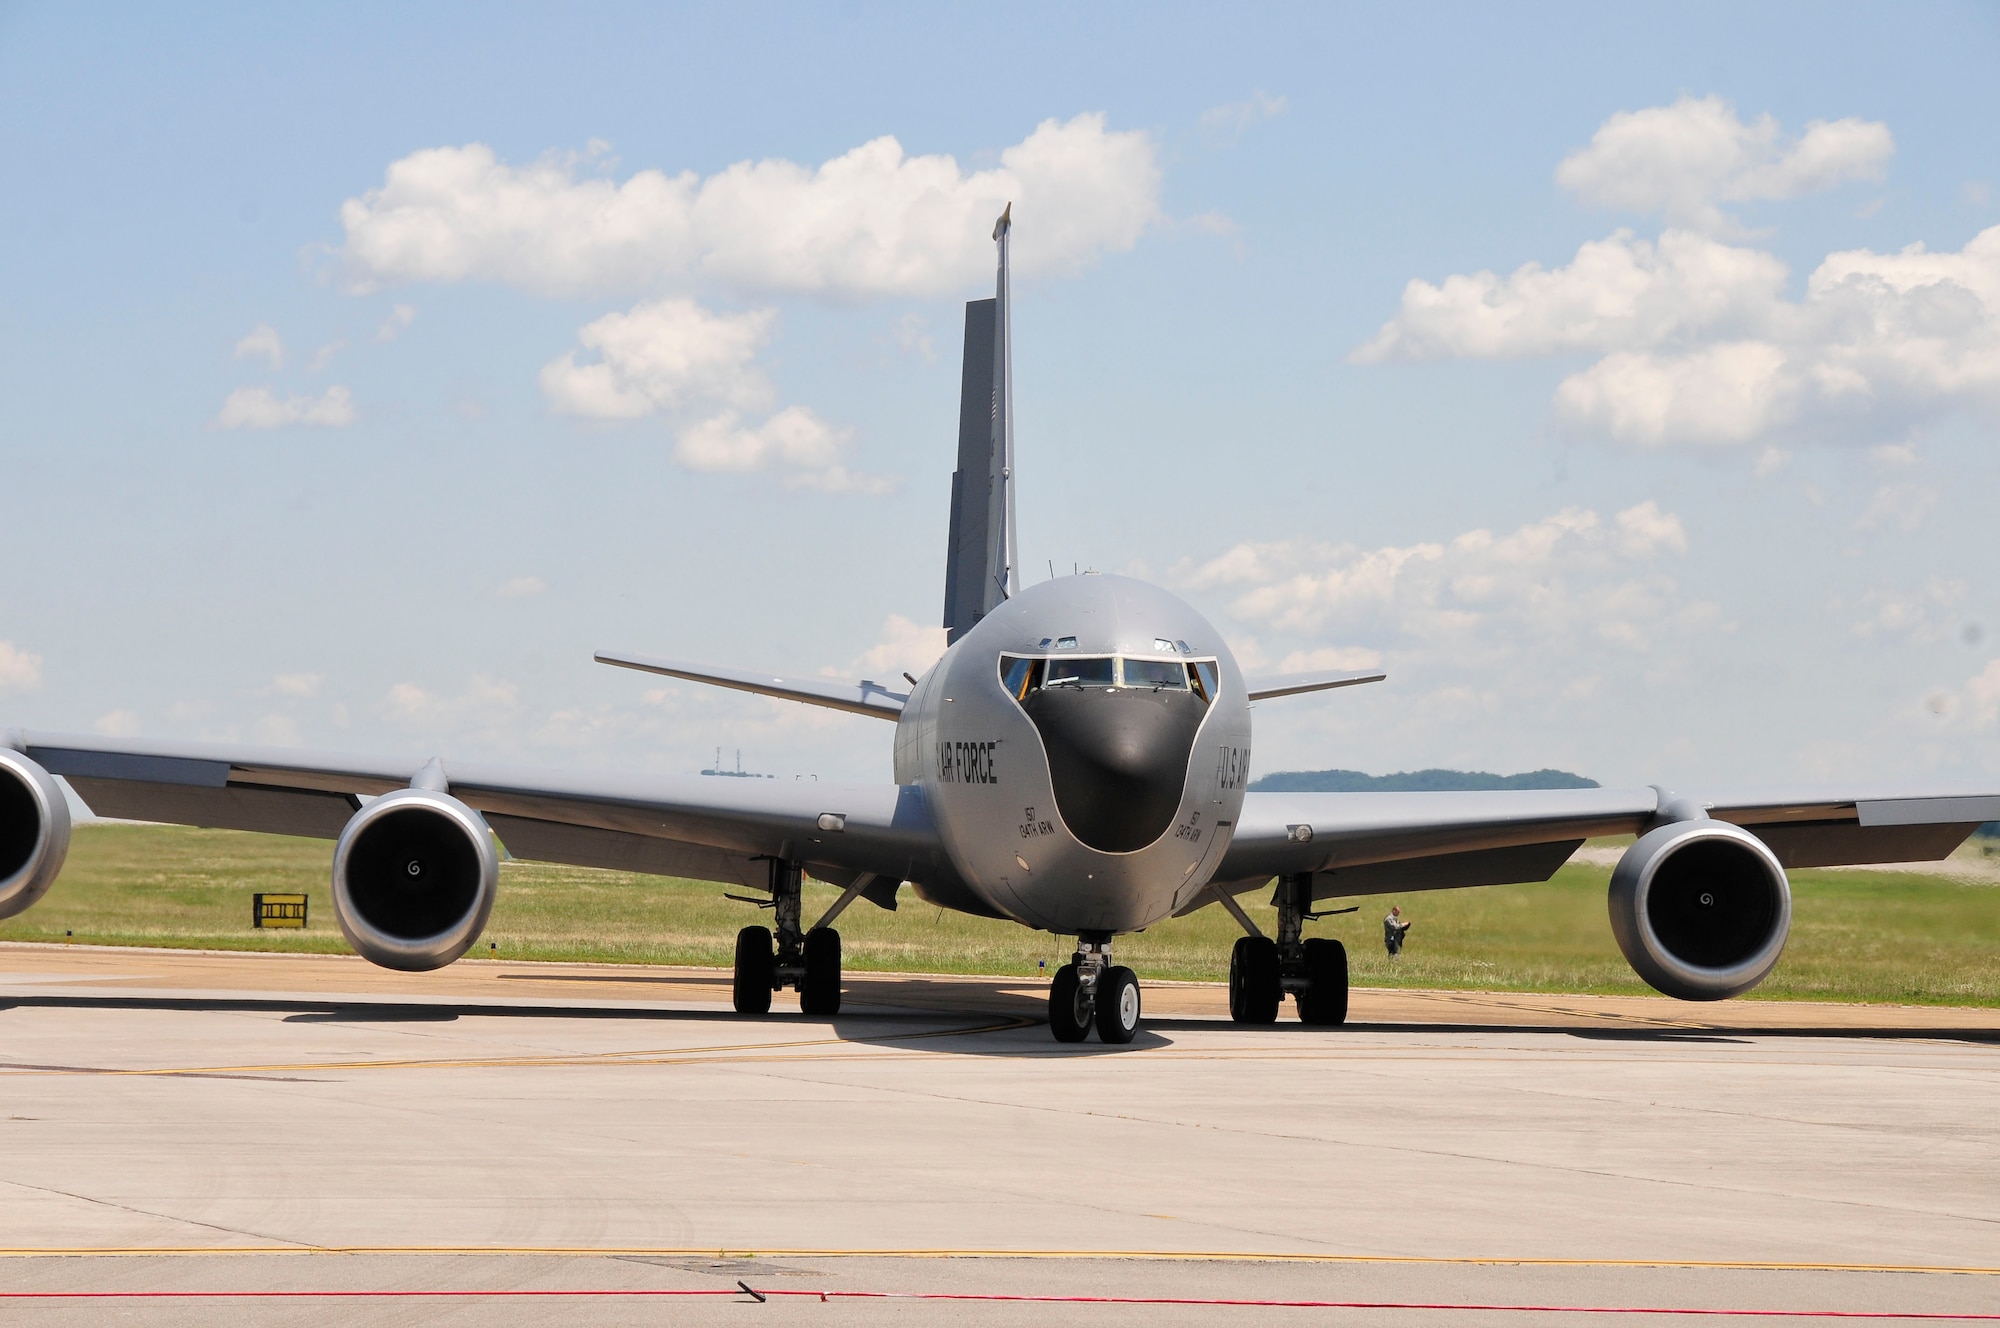 A KC-135R STRATOTANKER TAXIES DURING AN EXERCISE AT MCGHEE TYSON AIR NATIONAL GUARD BASE, KNOXVILLE, TENNESSEE. 